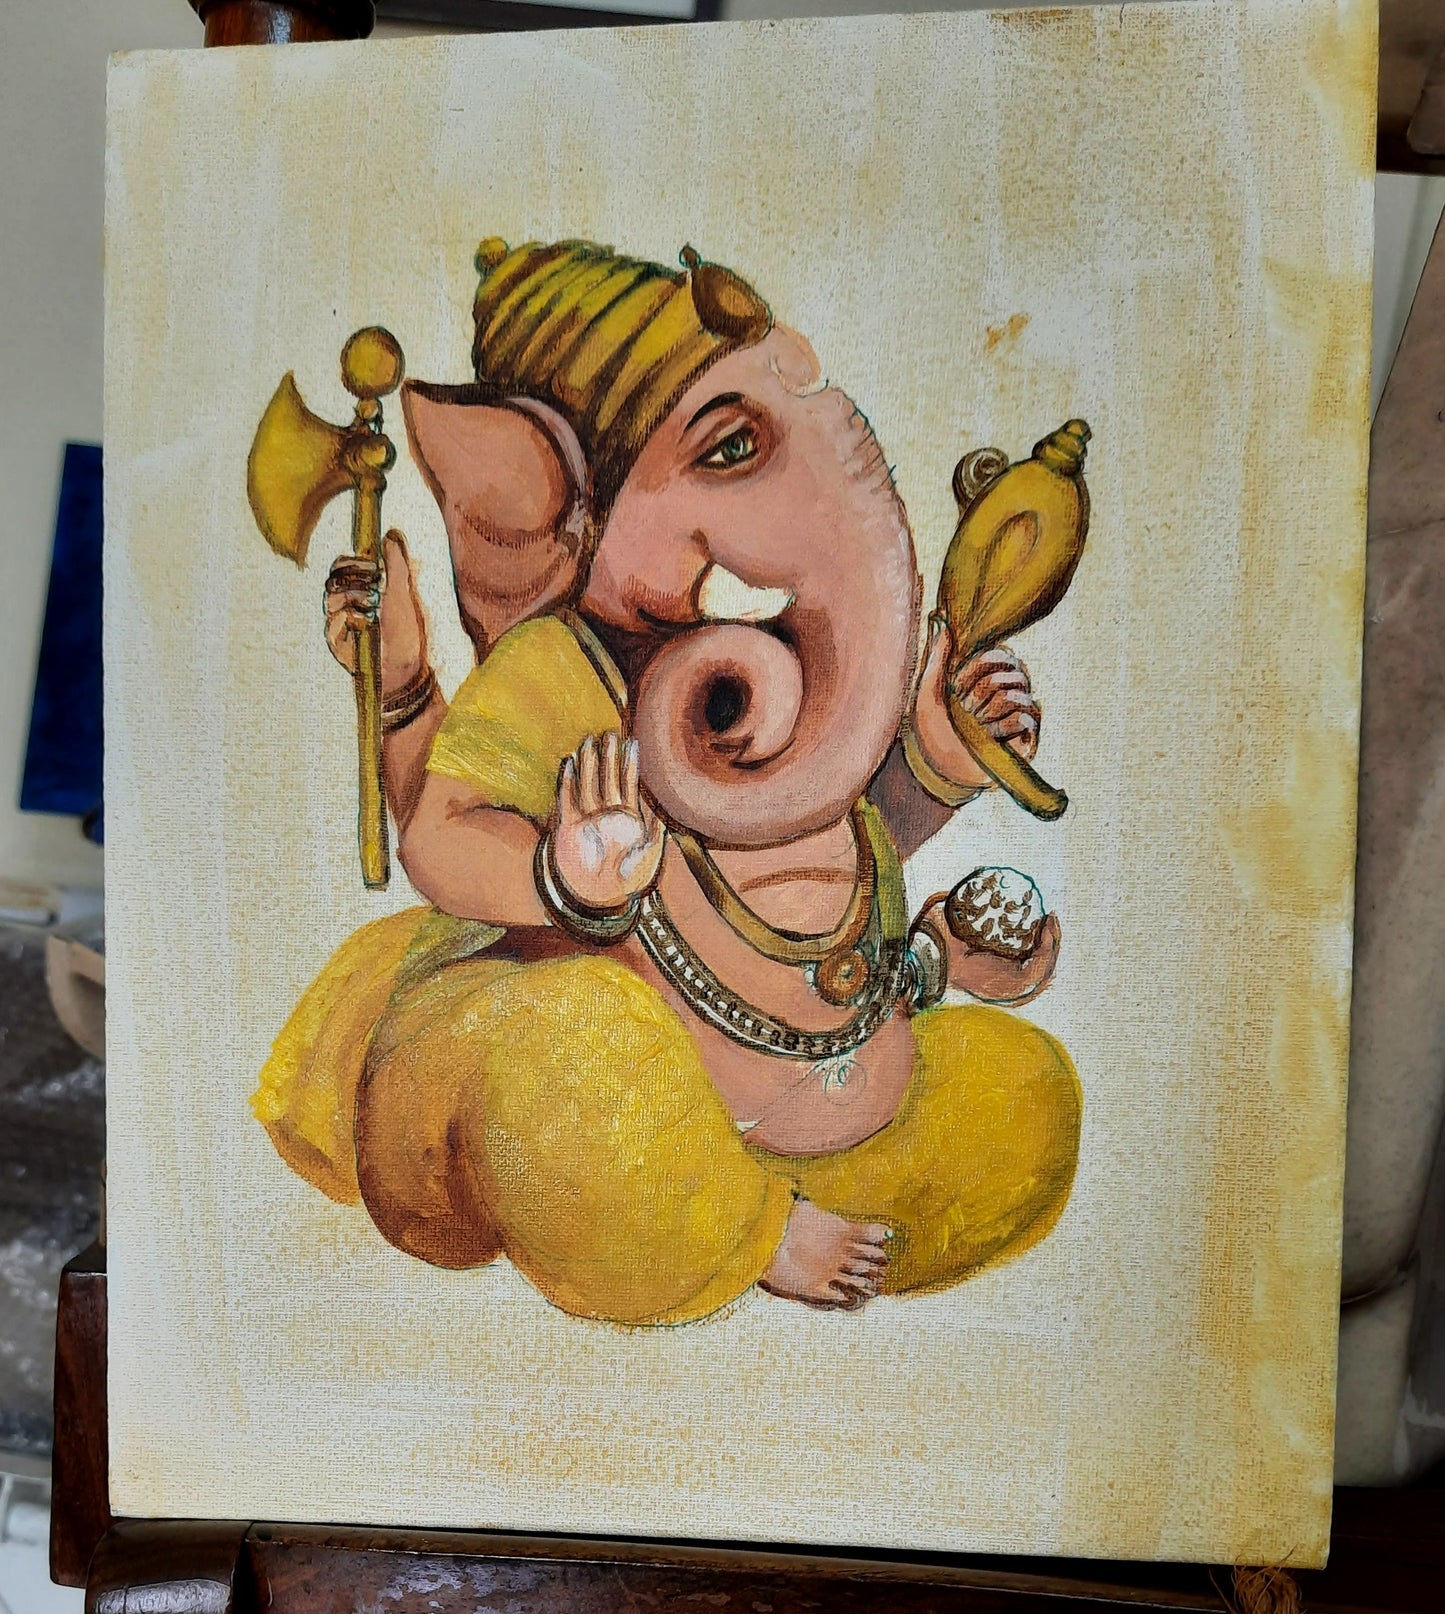 Lord Ganesha The Ultimate, Indian God artwork on canvas